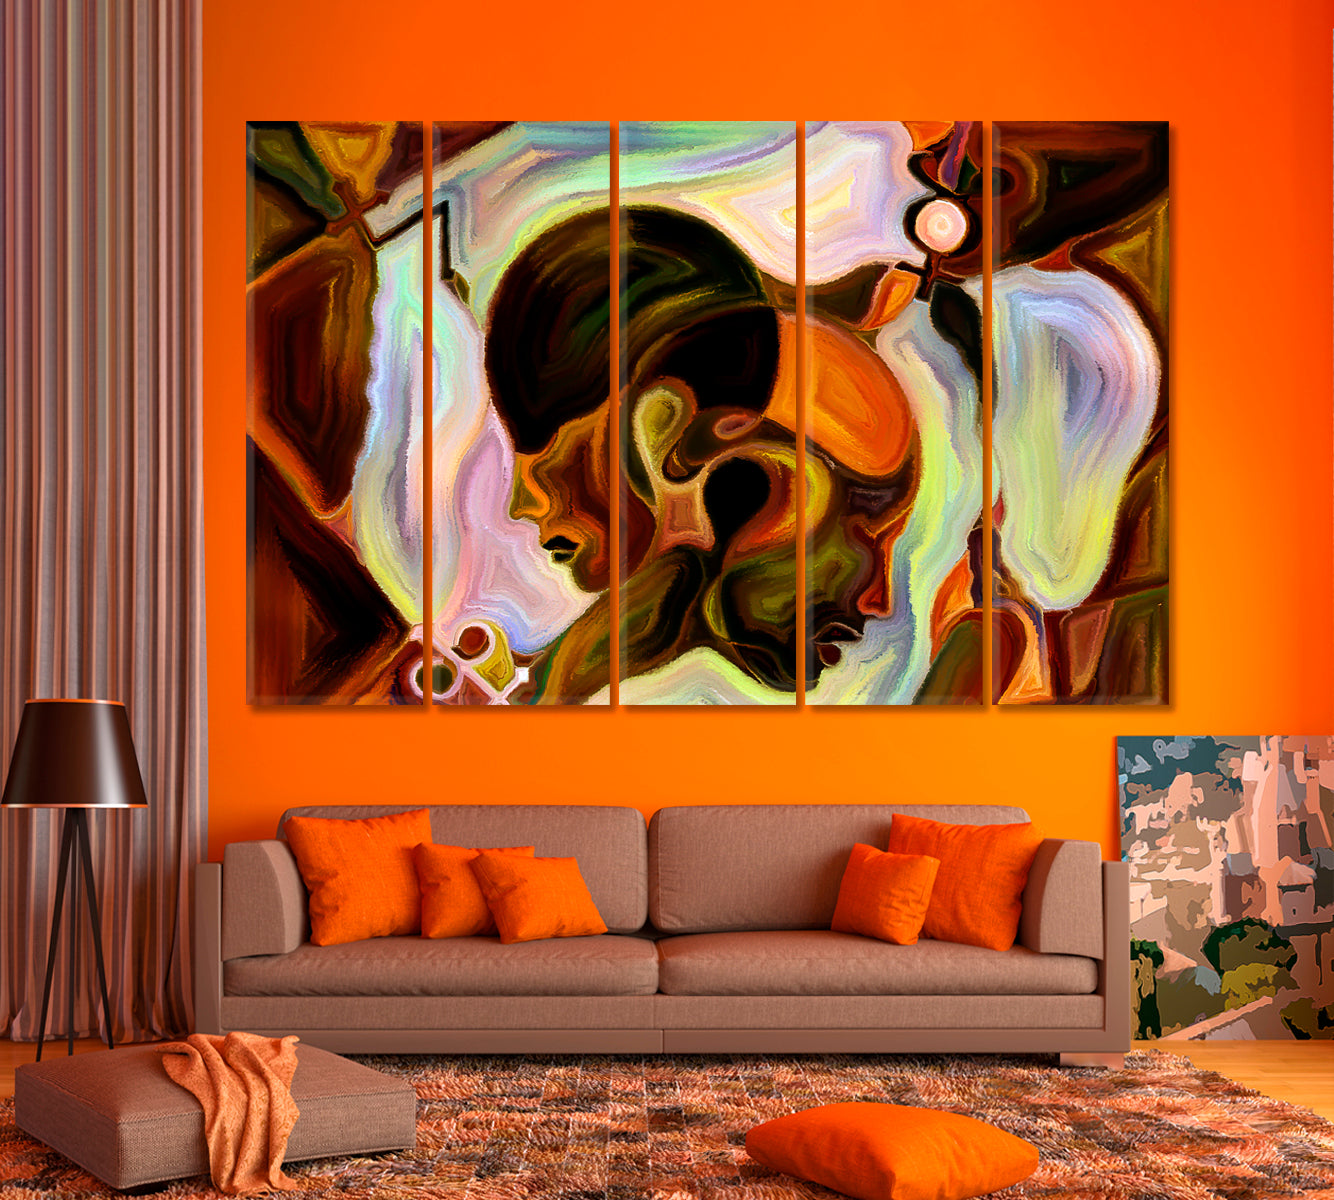 Internal Reality And Unity Of Life Abstract Design Surreal Fantasy Large Art Print Décor Artesty 5 panels 36" x 24" 